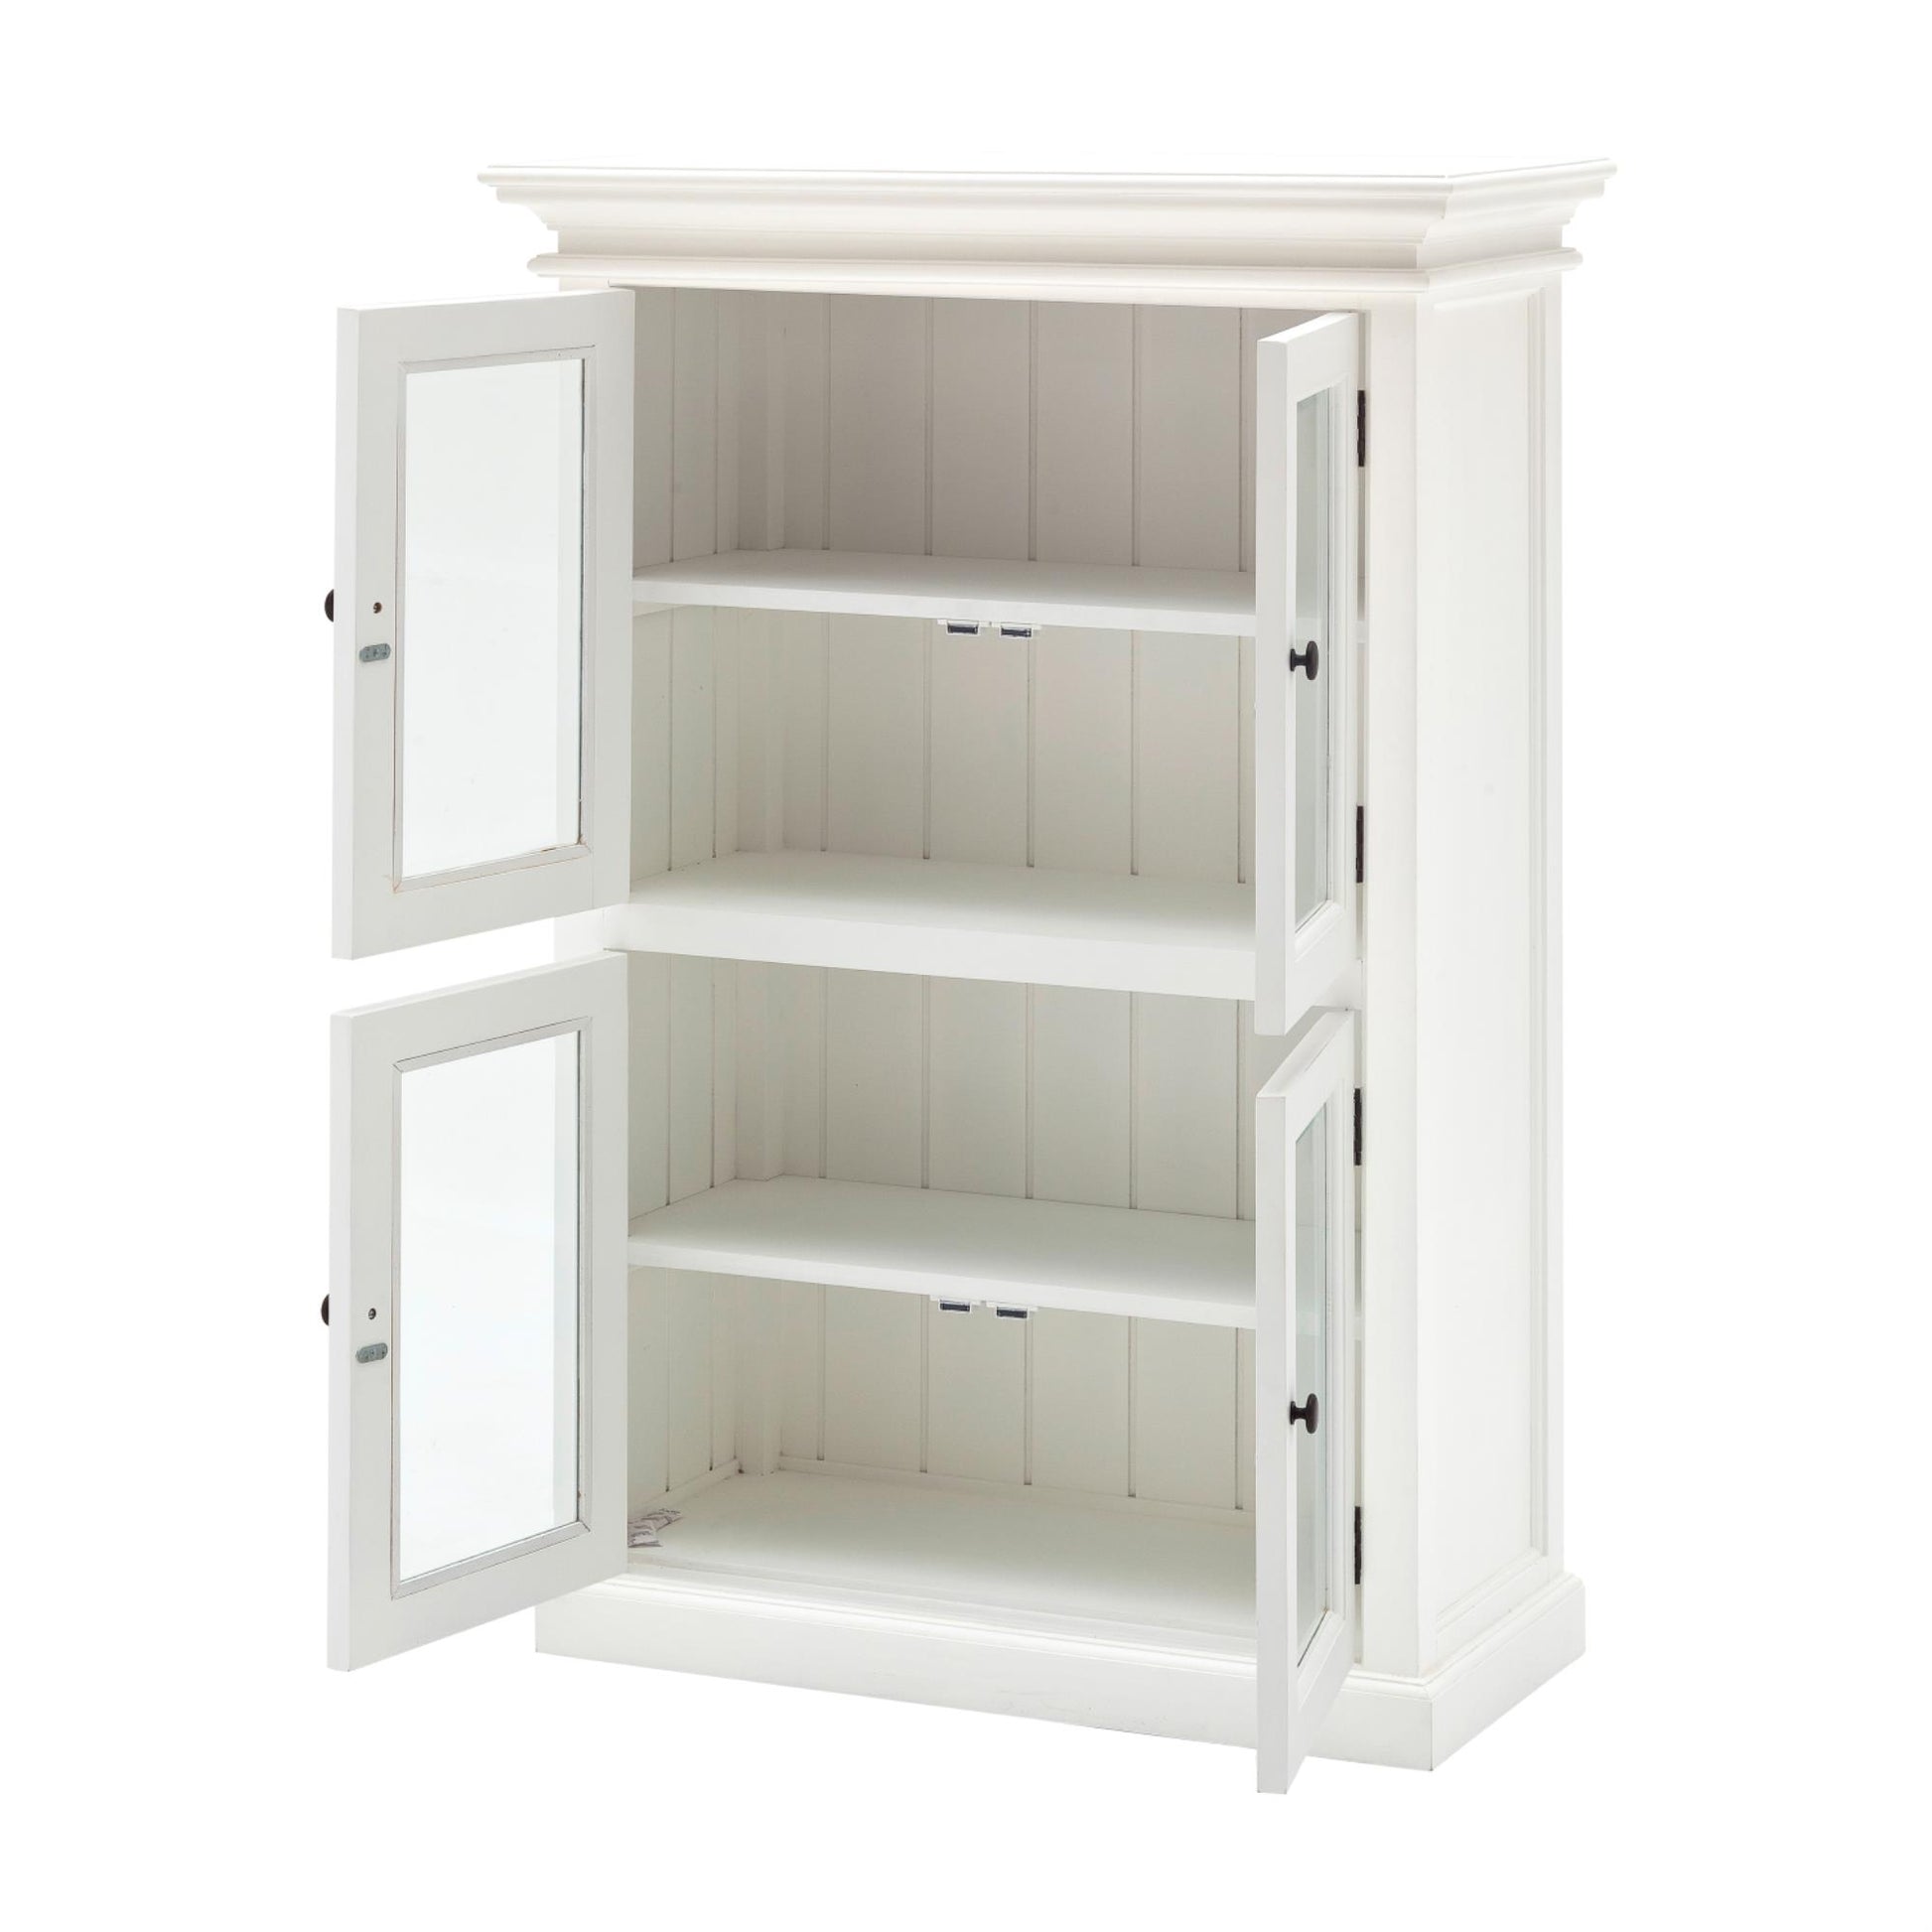 Halifax collection by Nova Solo.  2 Level Pantry CasaFenix